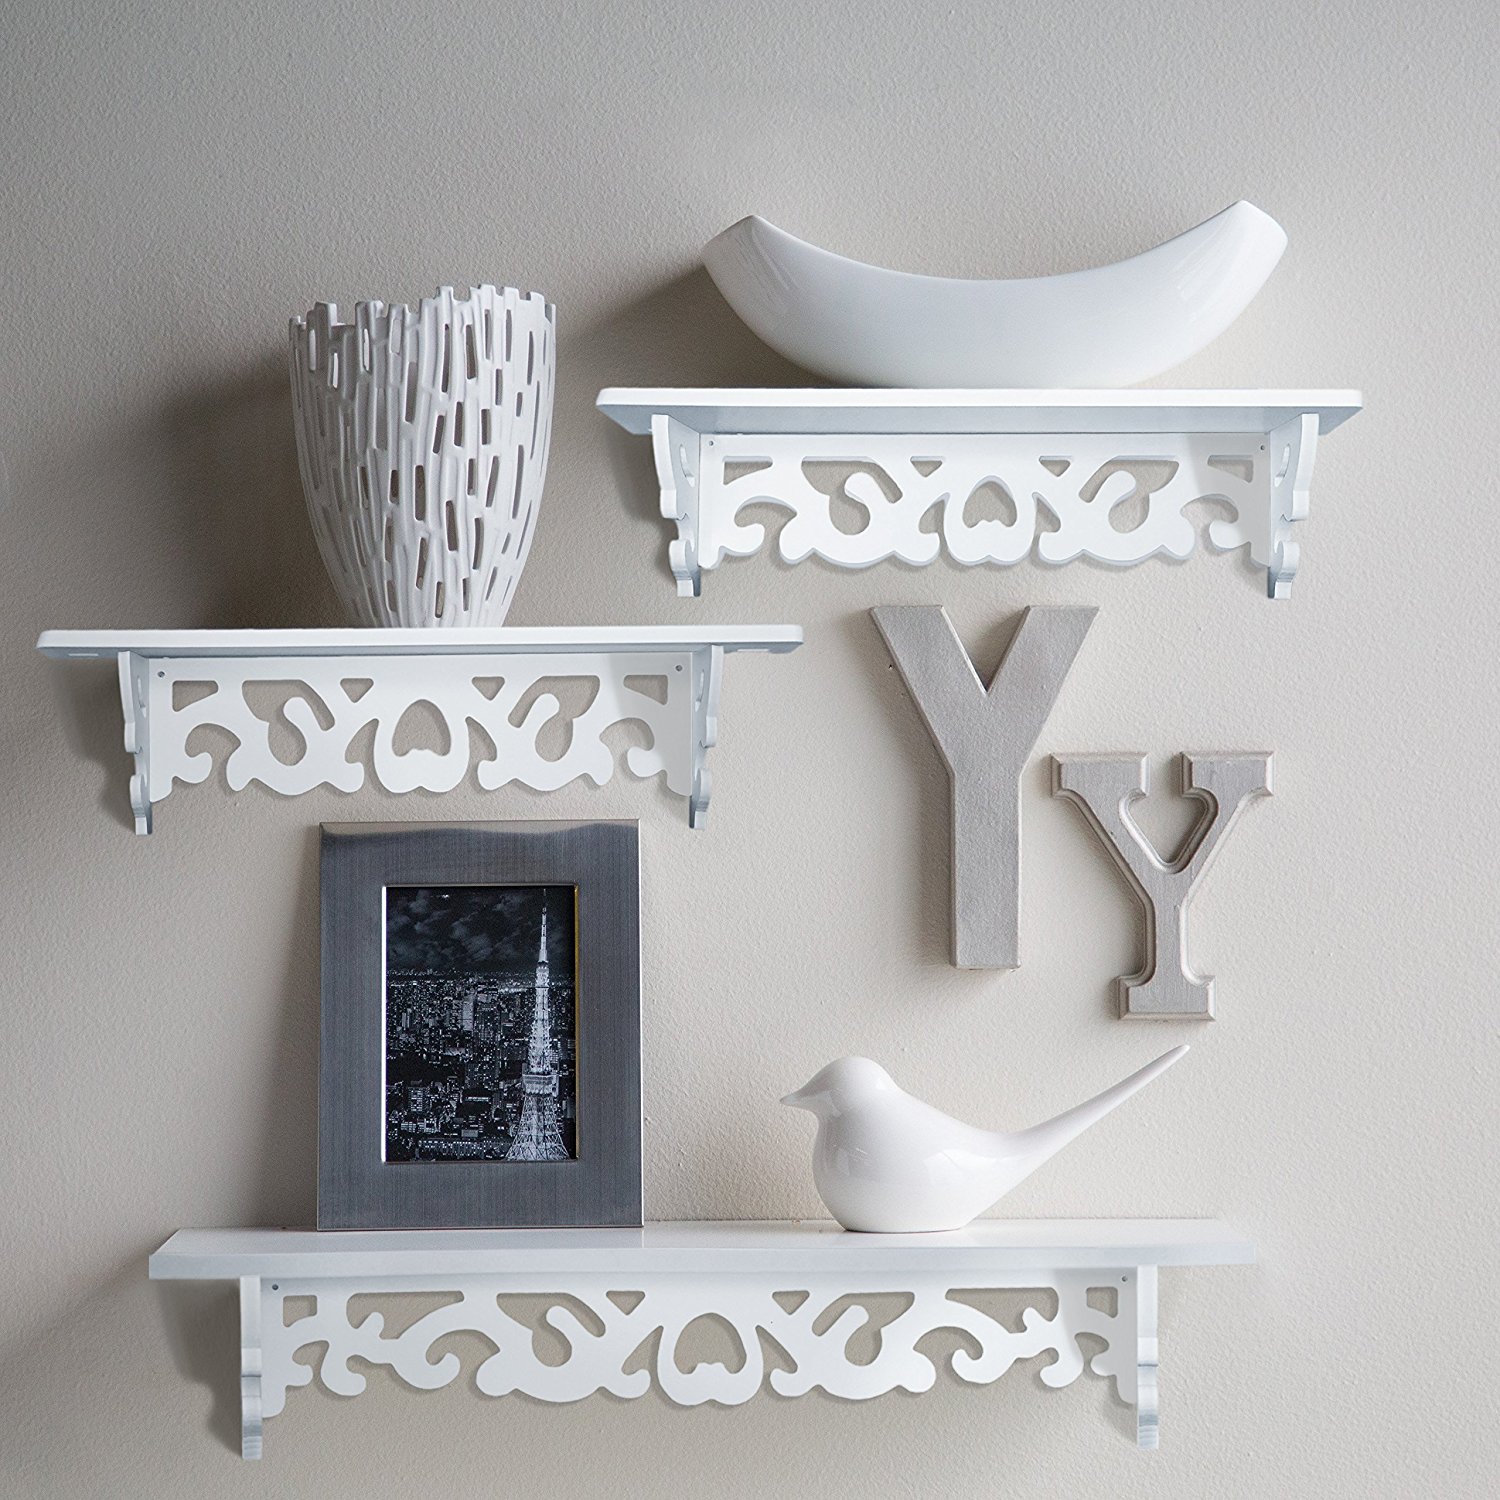 Set of 3 Floating wall shelves, great for books or collections, add design and taste to your room!